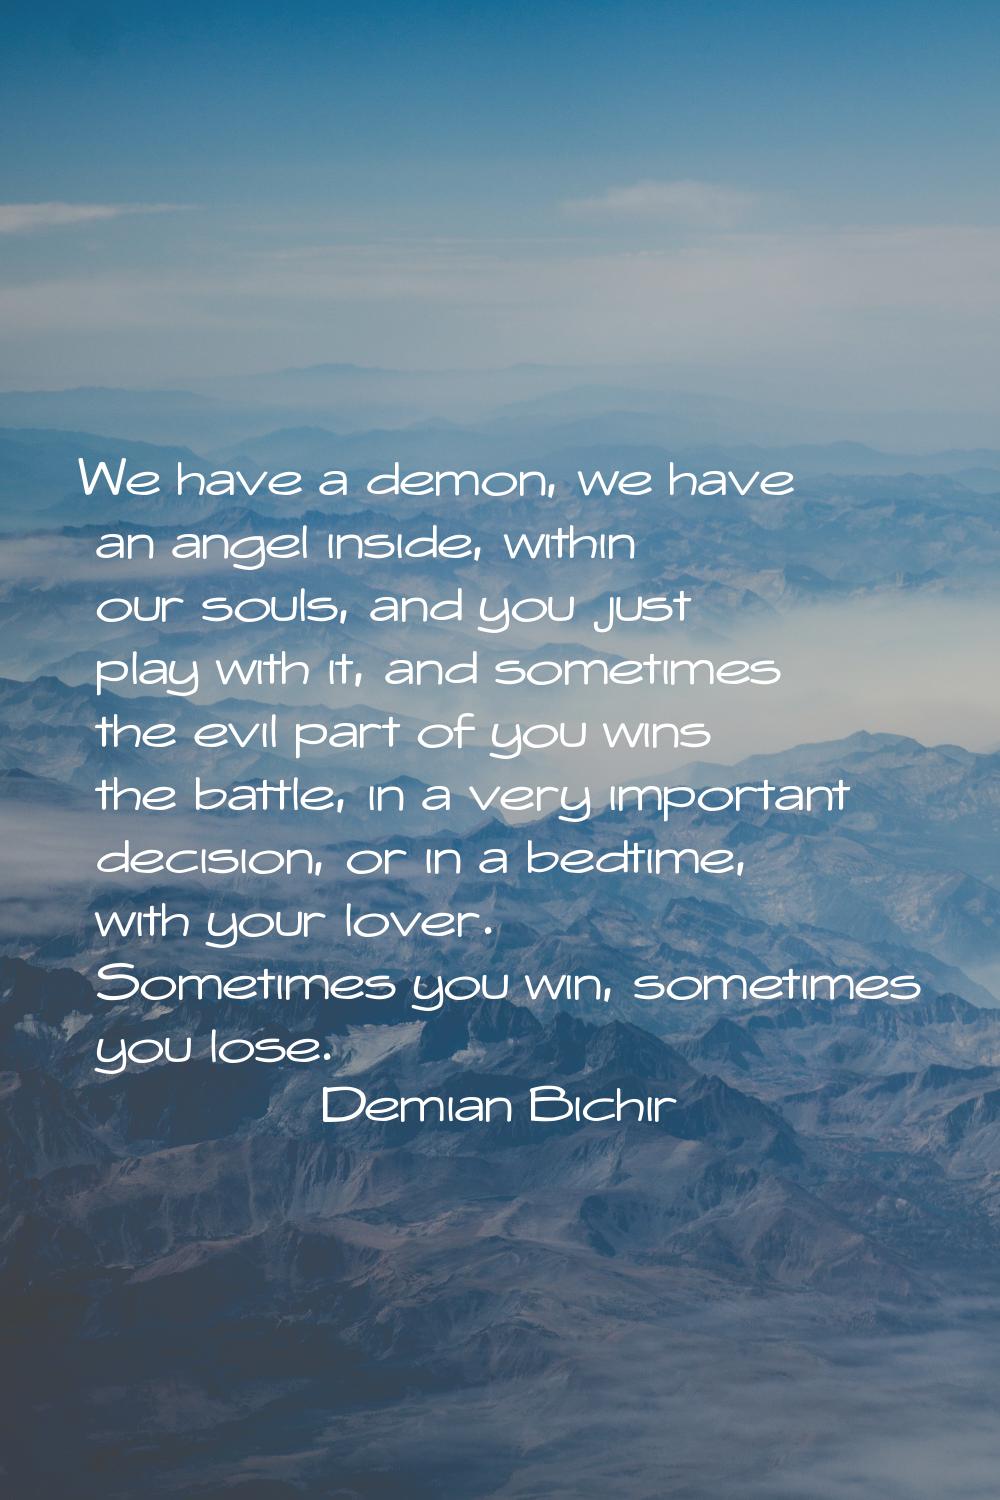 We have a demon, we have an angel inside, within our souls, and you just play with it, and sometime